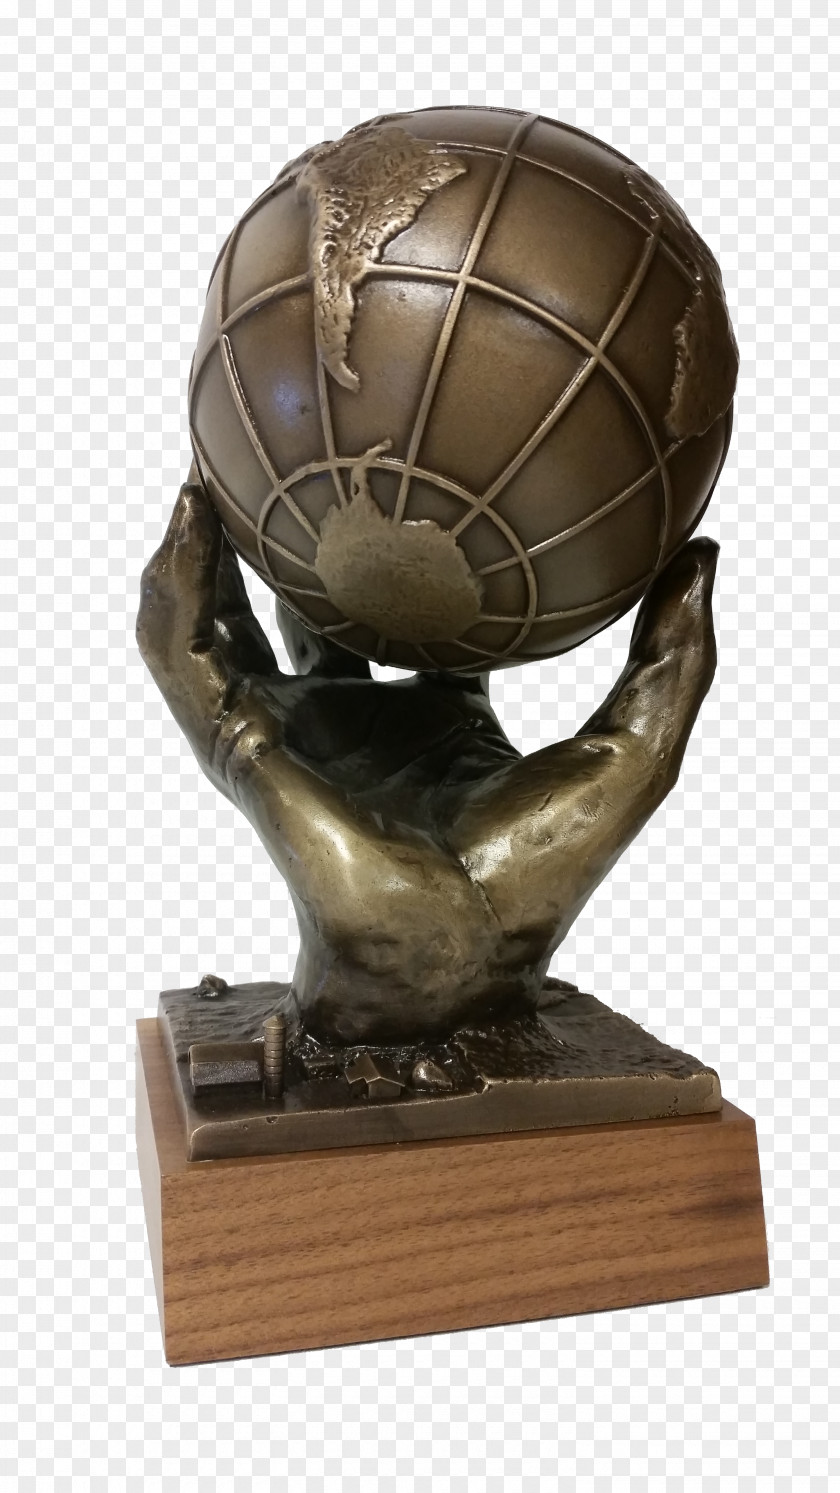 Award Trophy Protective Gear In Sports Sculpture PNG